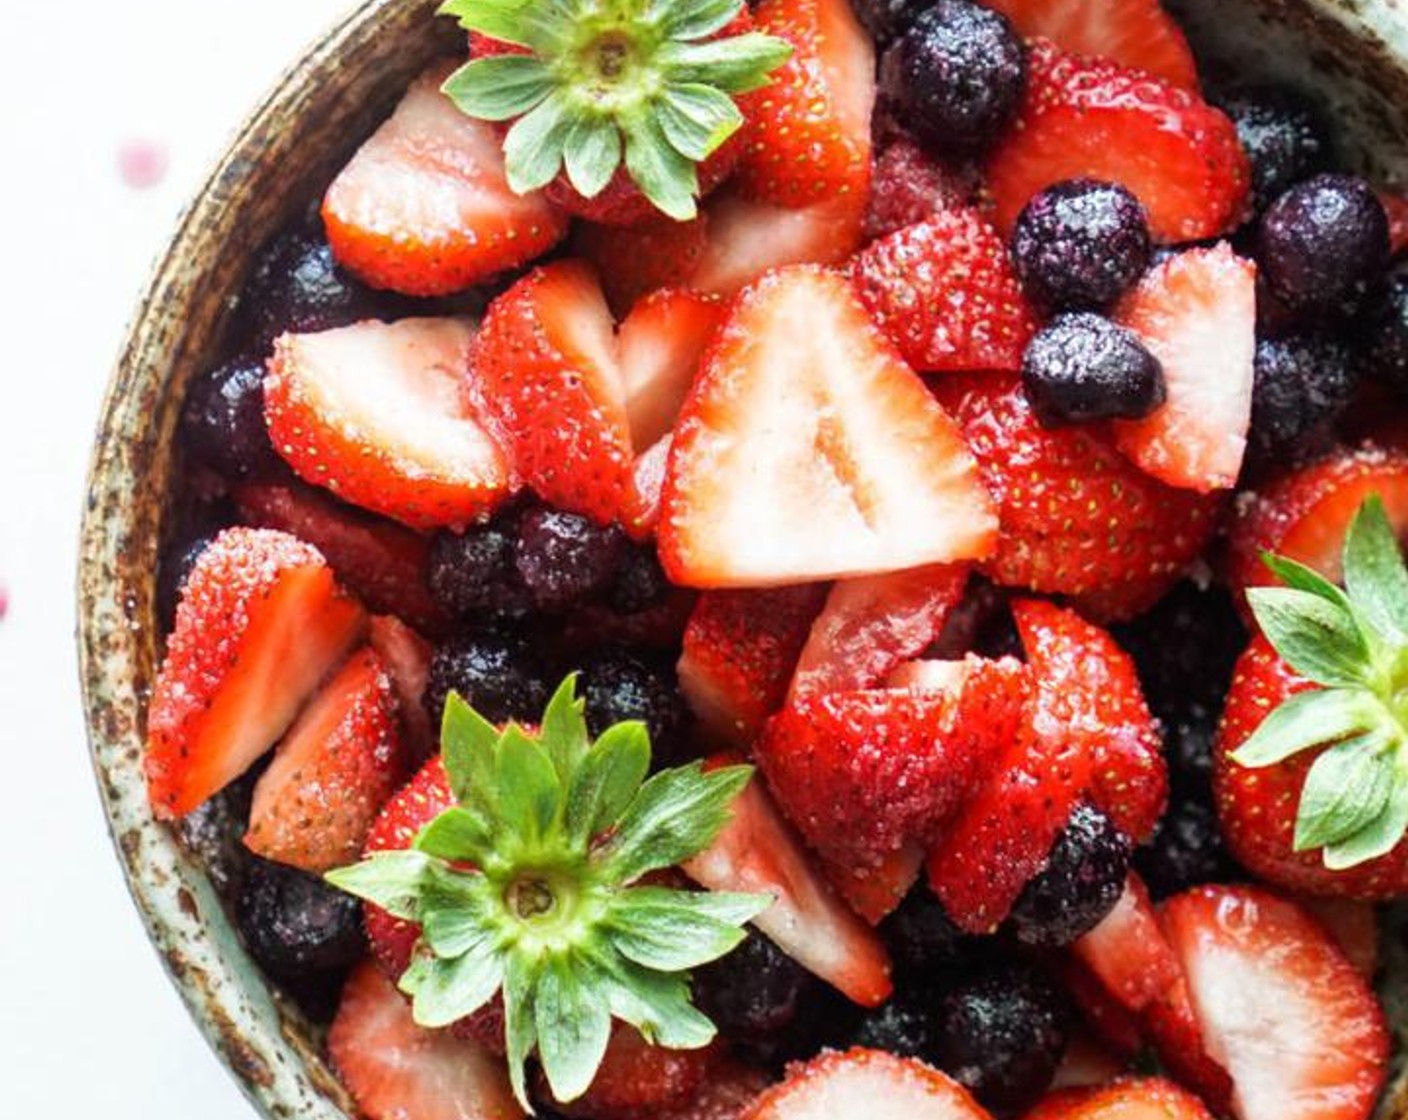 step 1 Combine the Fresh Strawberries (3 cups), Fresh Blueberry (1 cup), and Granulated Sugar (1/4 cup). Mix and set aside for 25 minutes until the strawberries are juicy. While those are marinating, preheat the oven to 375 degrees F (190 degrees C).